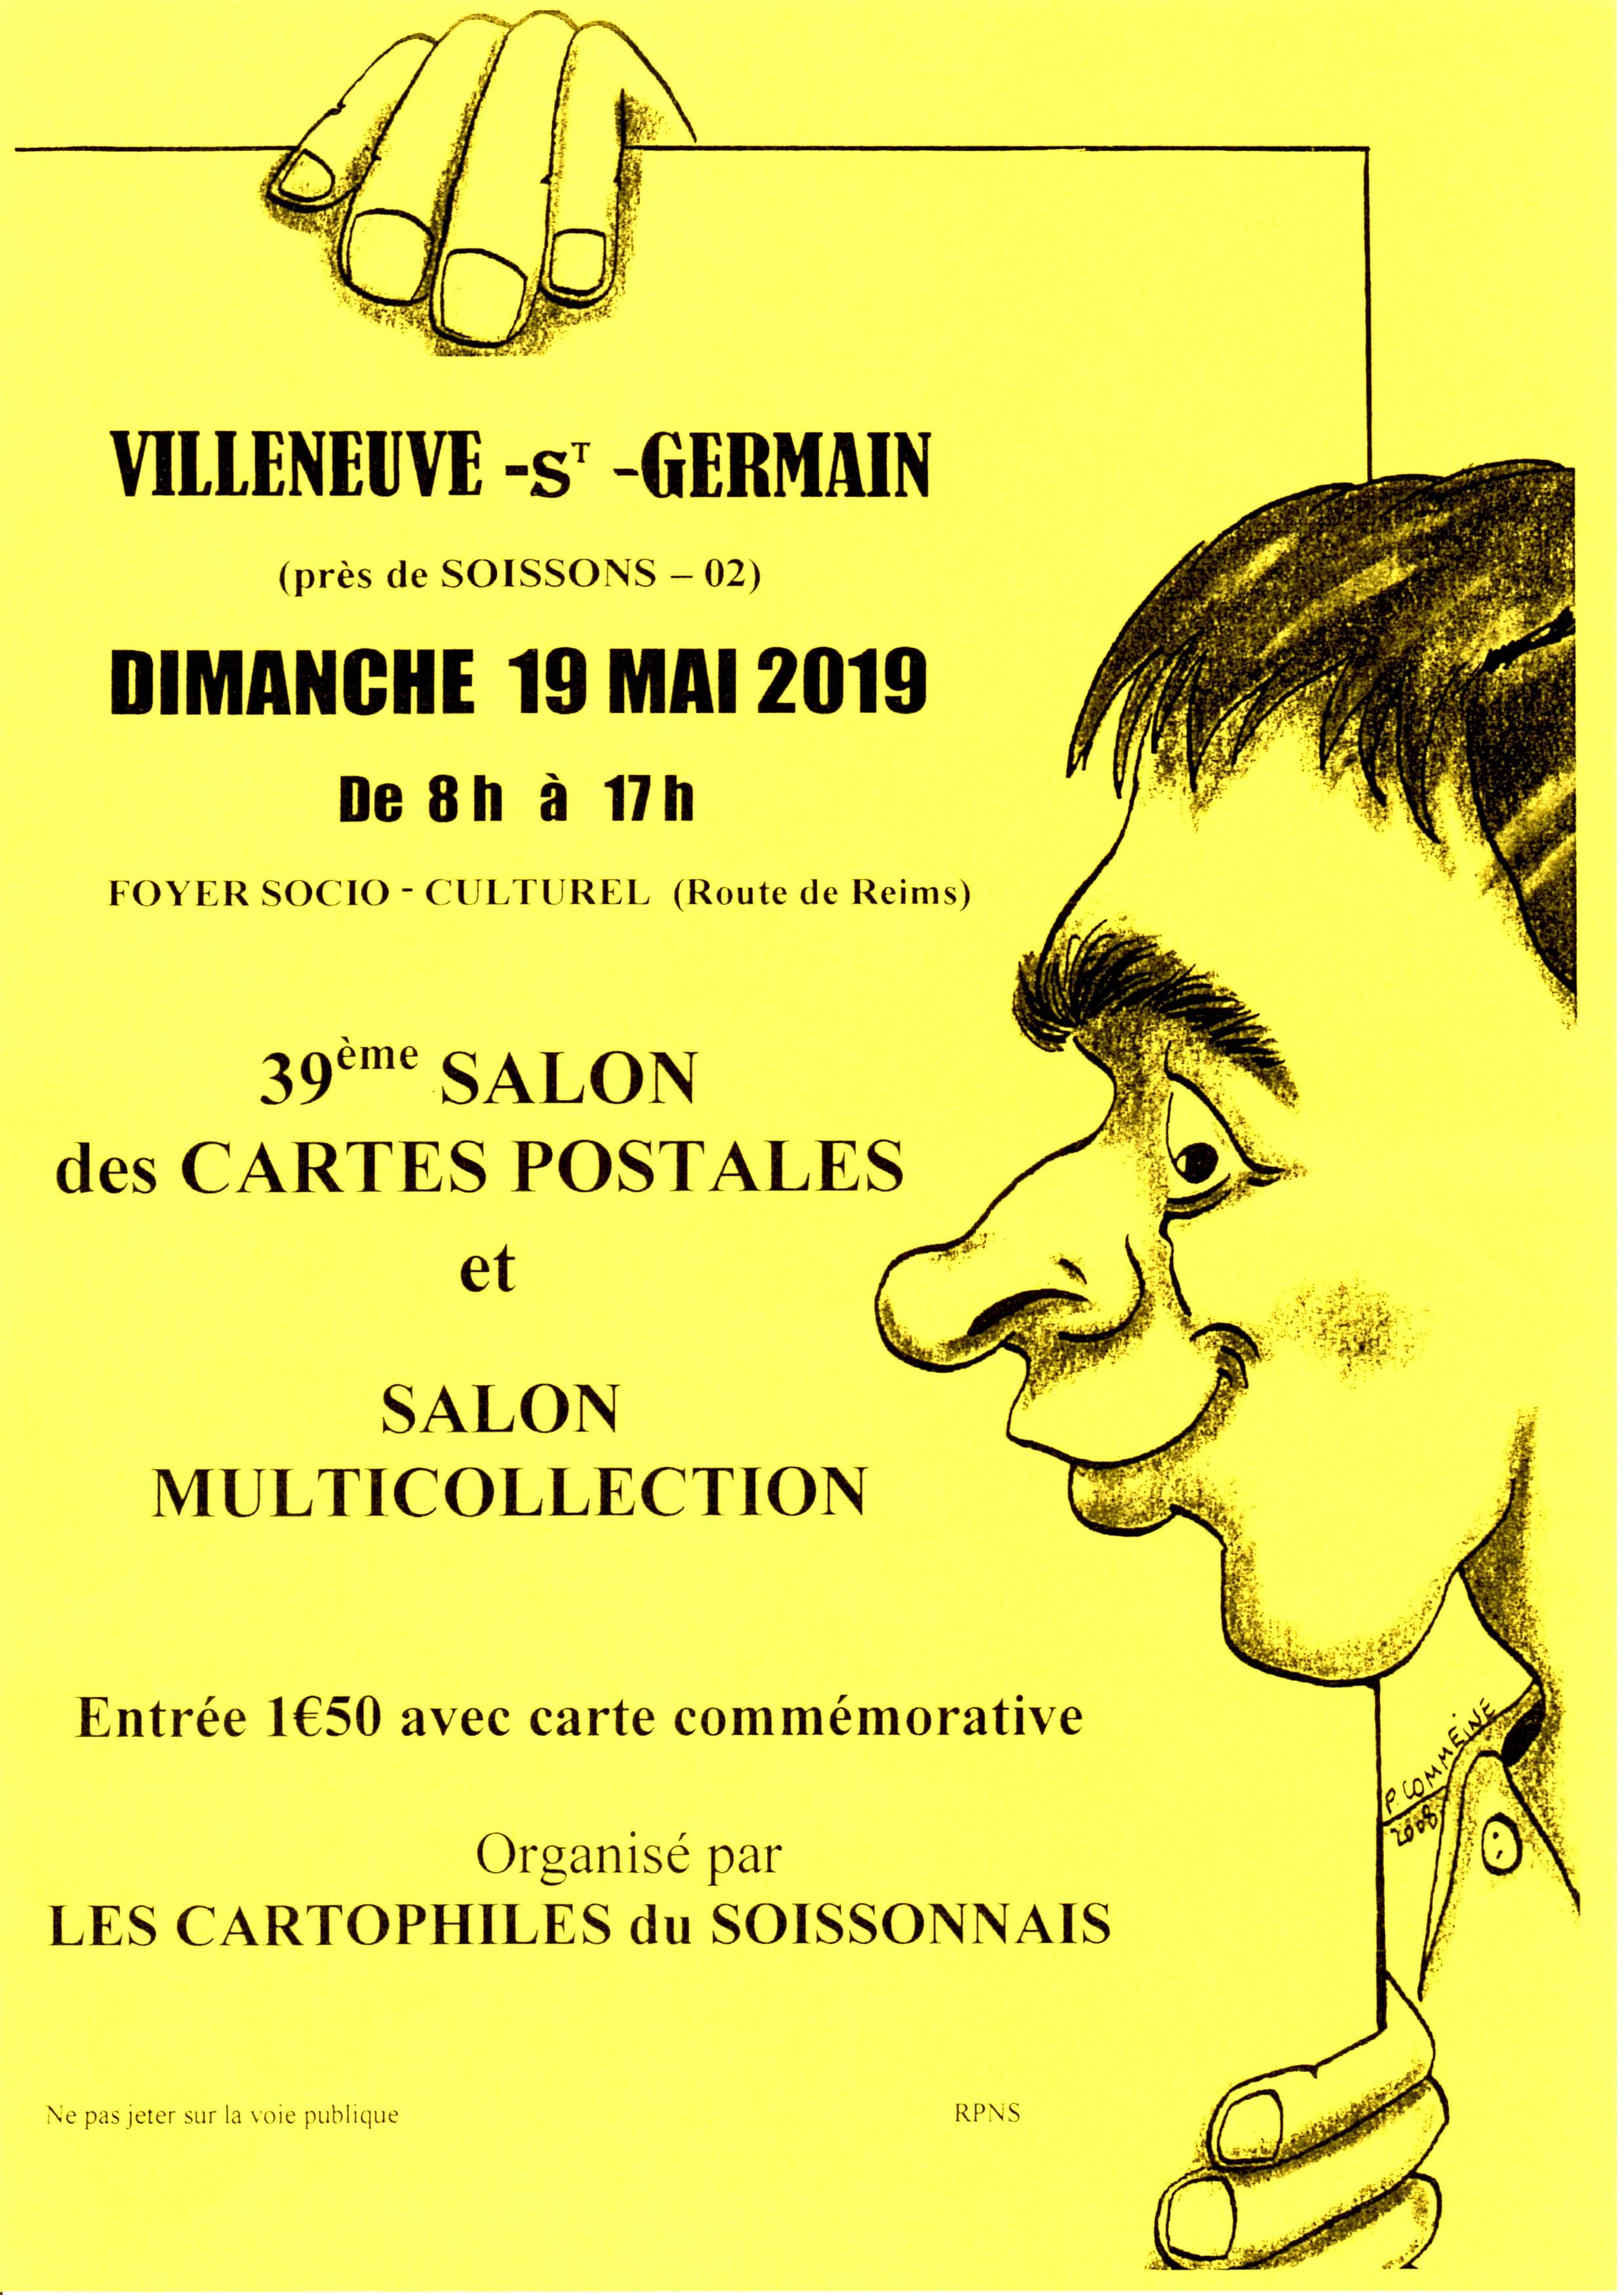 You are currently viewing Salon cartes postales 2019